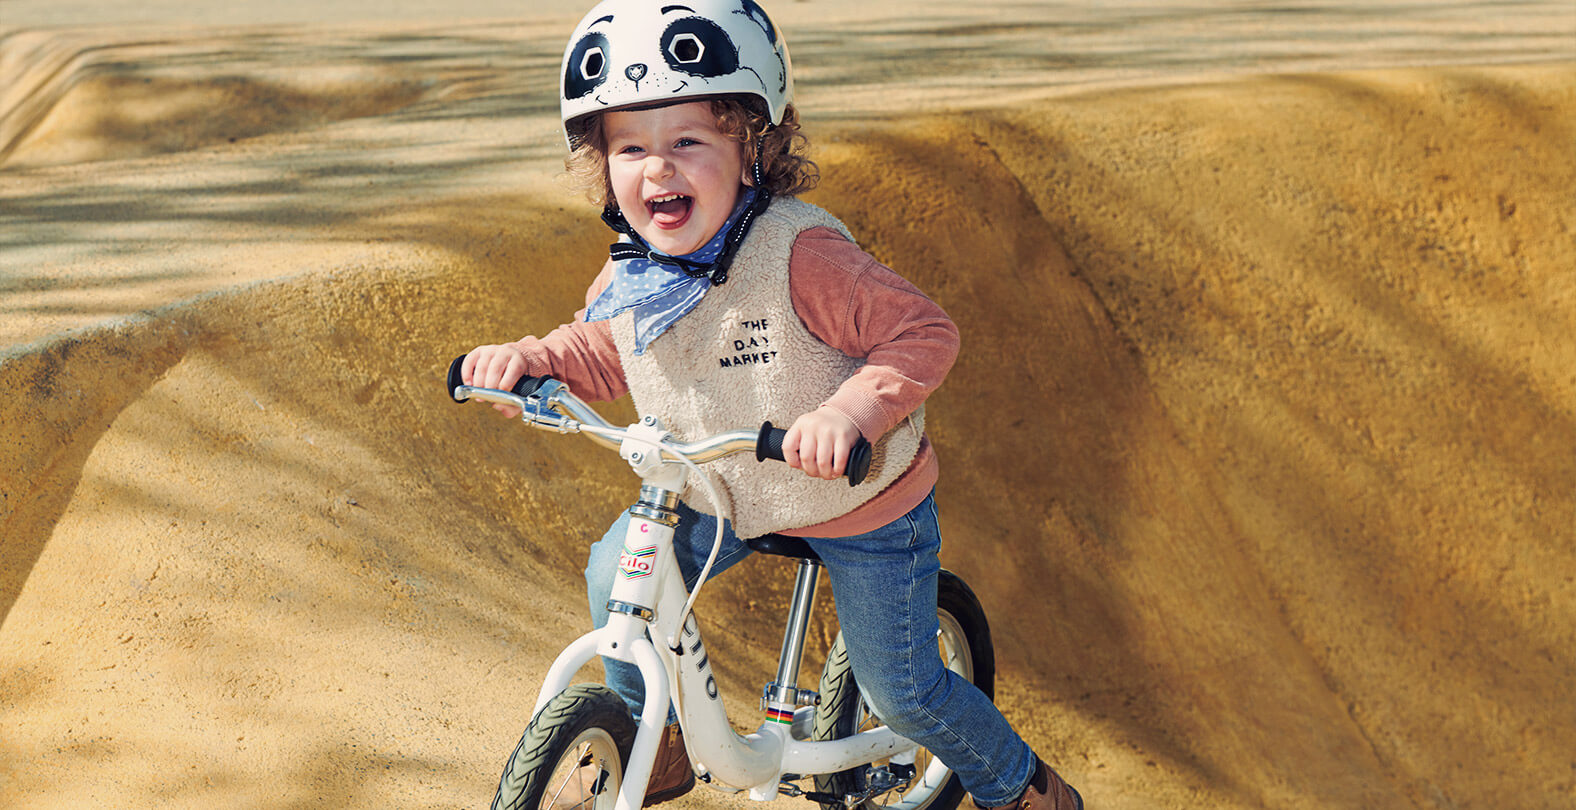 Little child with helmet on a balance bike in the pump track